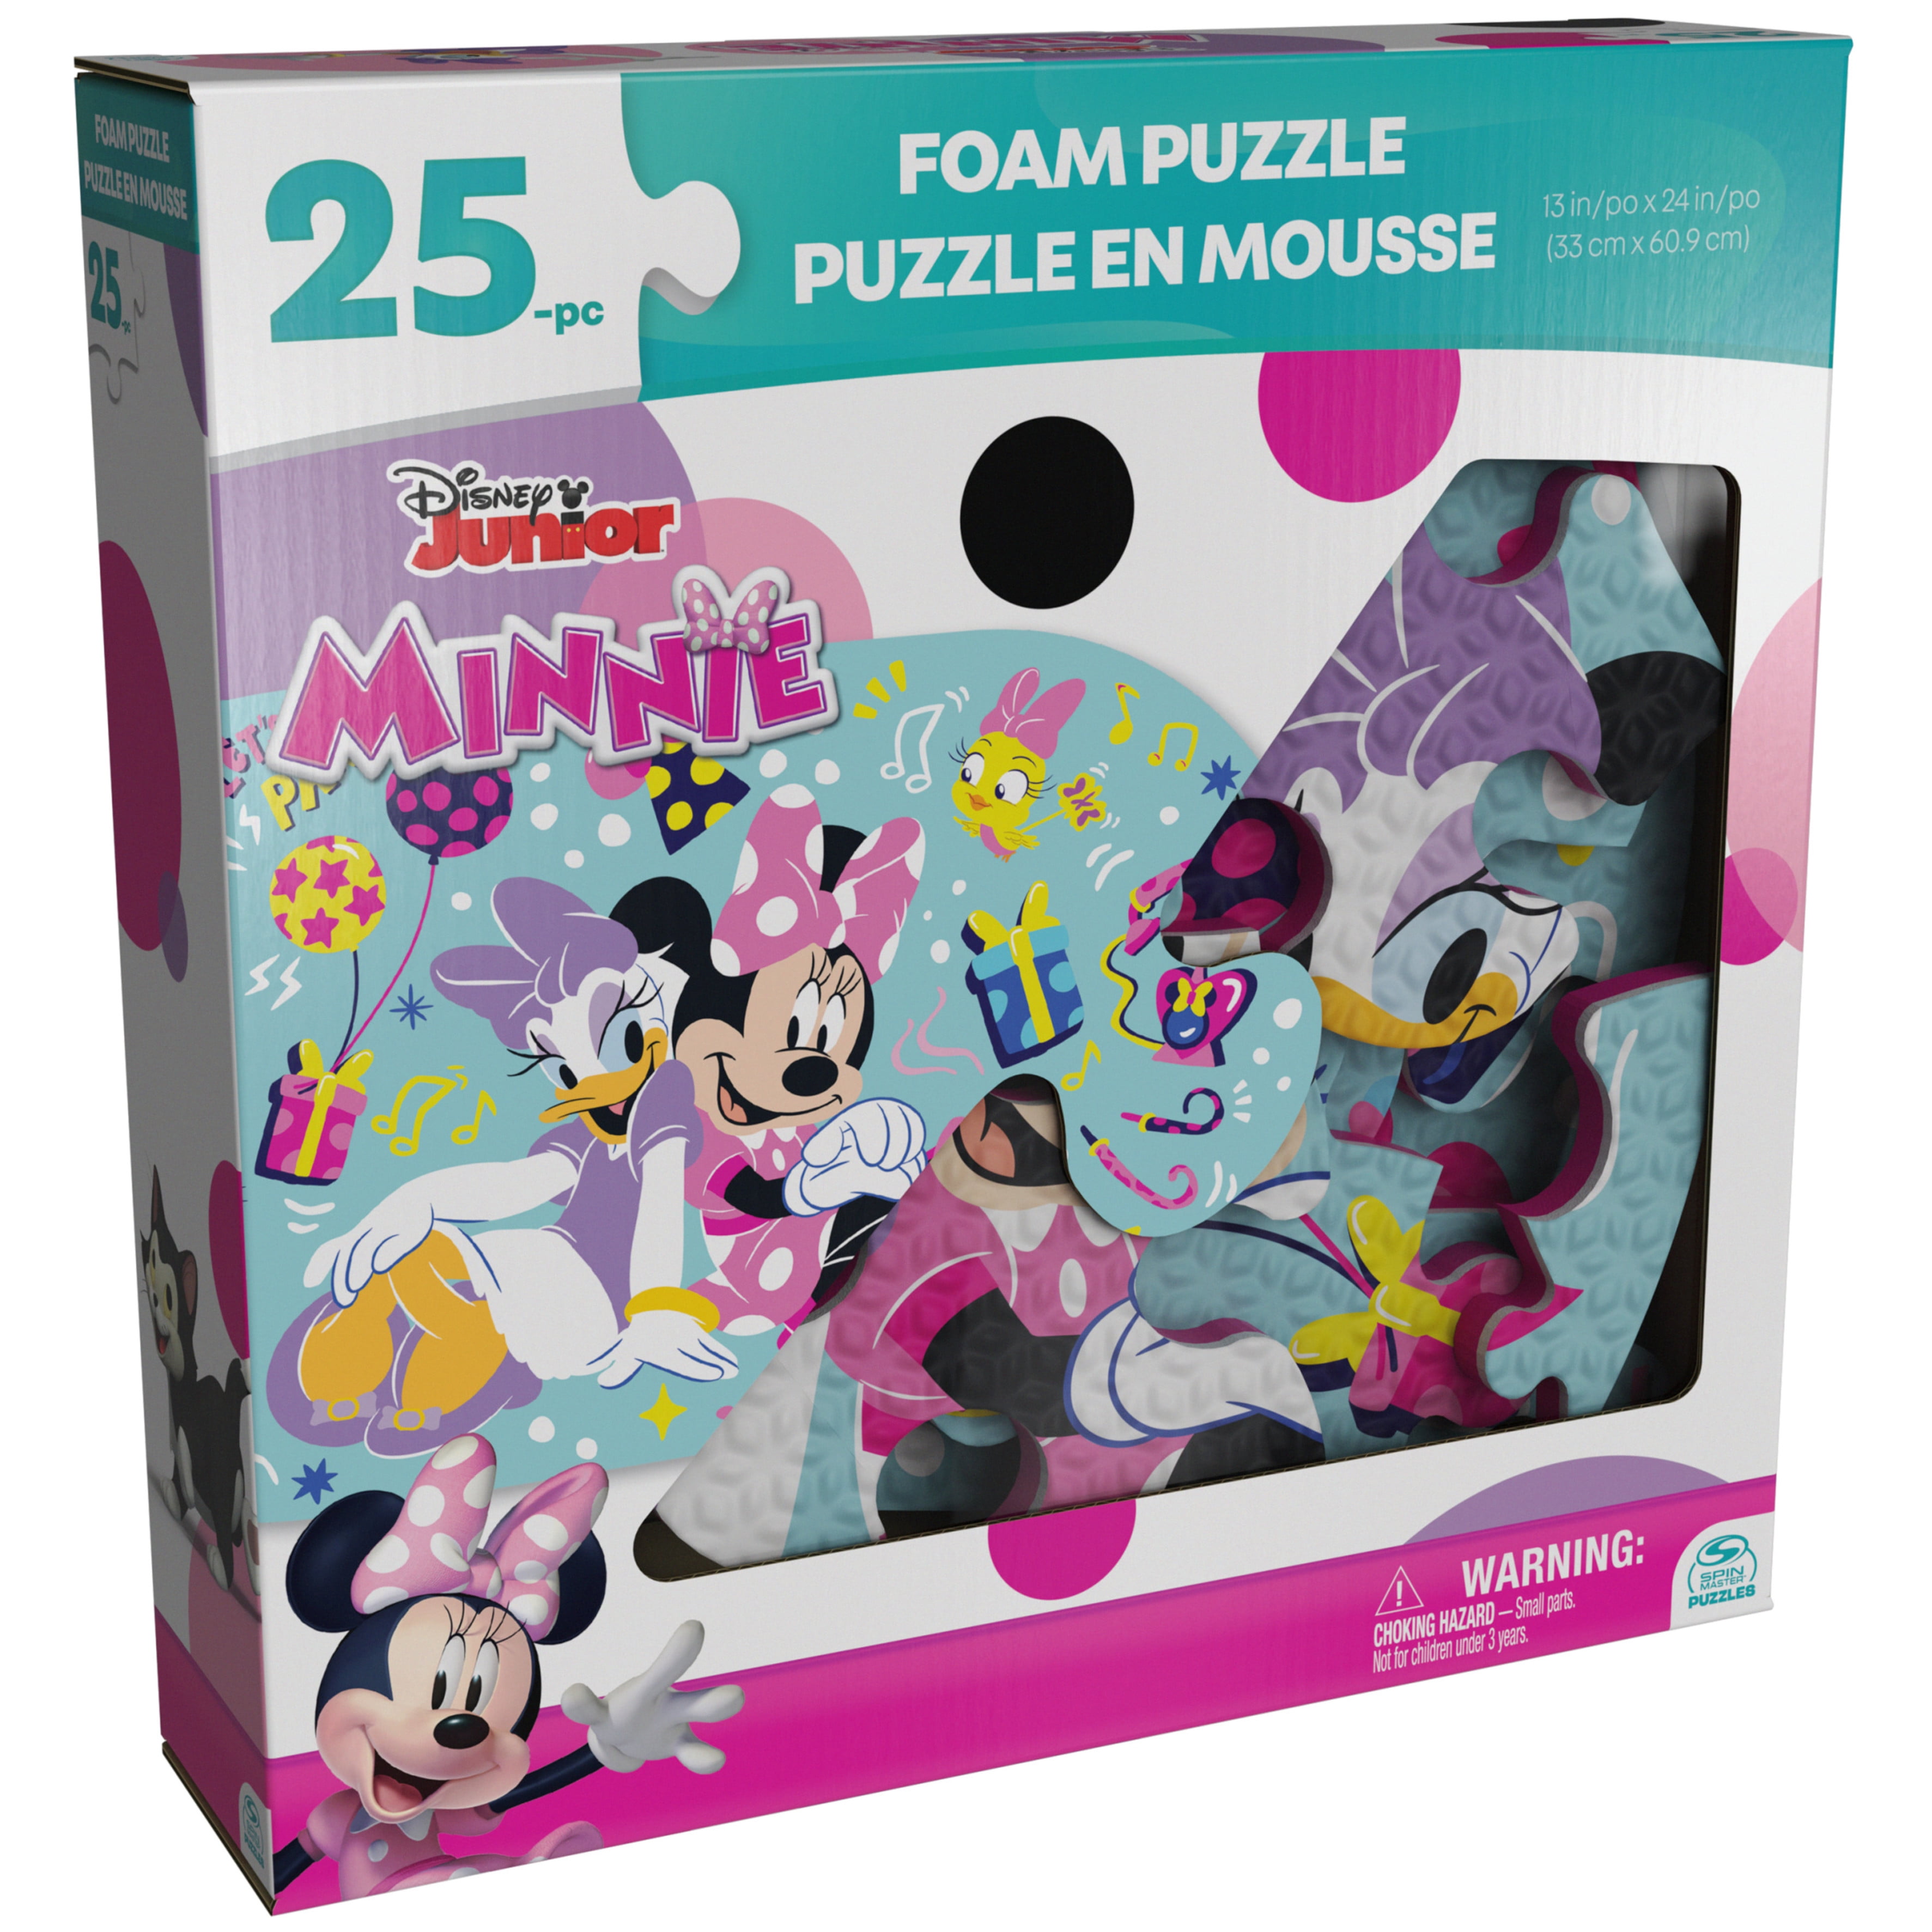 Disney's Minnie Mouse Ratna's 4 in 1 Puzzle, 3+ Age, CardBoard, 140 Pieces,  Fun and Learning Game for Kids Toddlers, Educational Toy